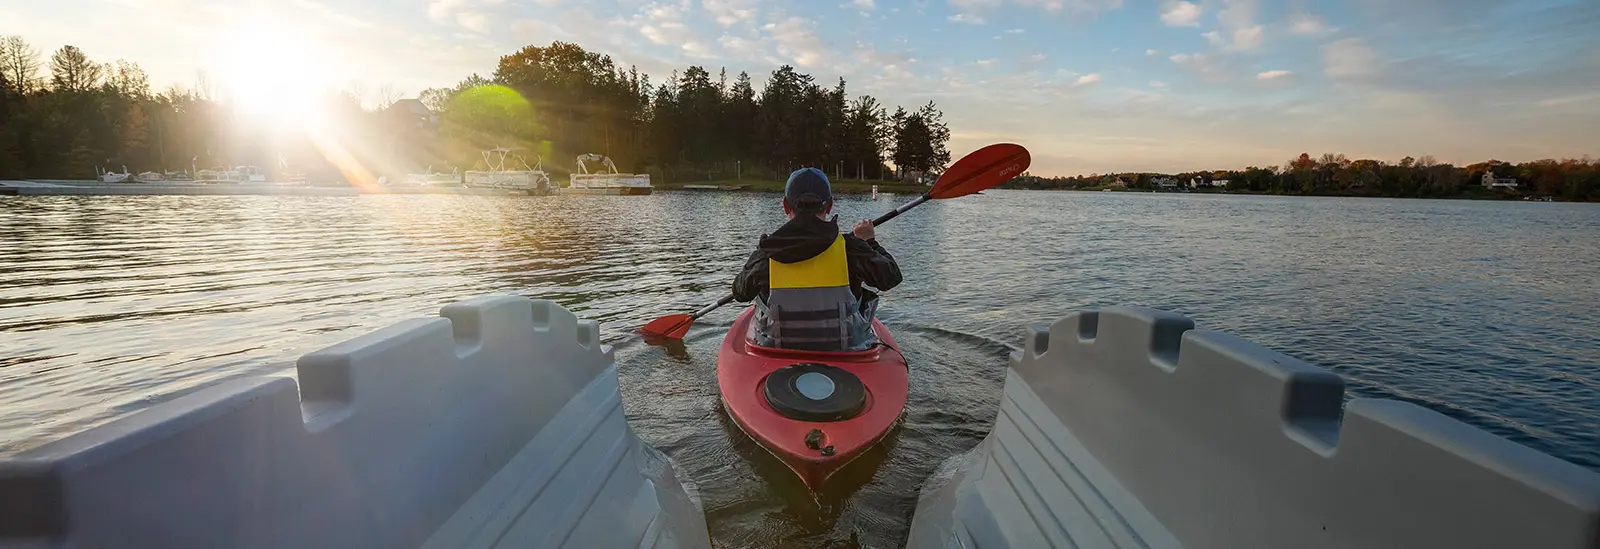 Back view of kayaker coming out of launch